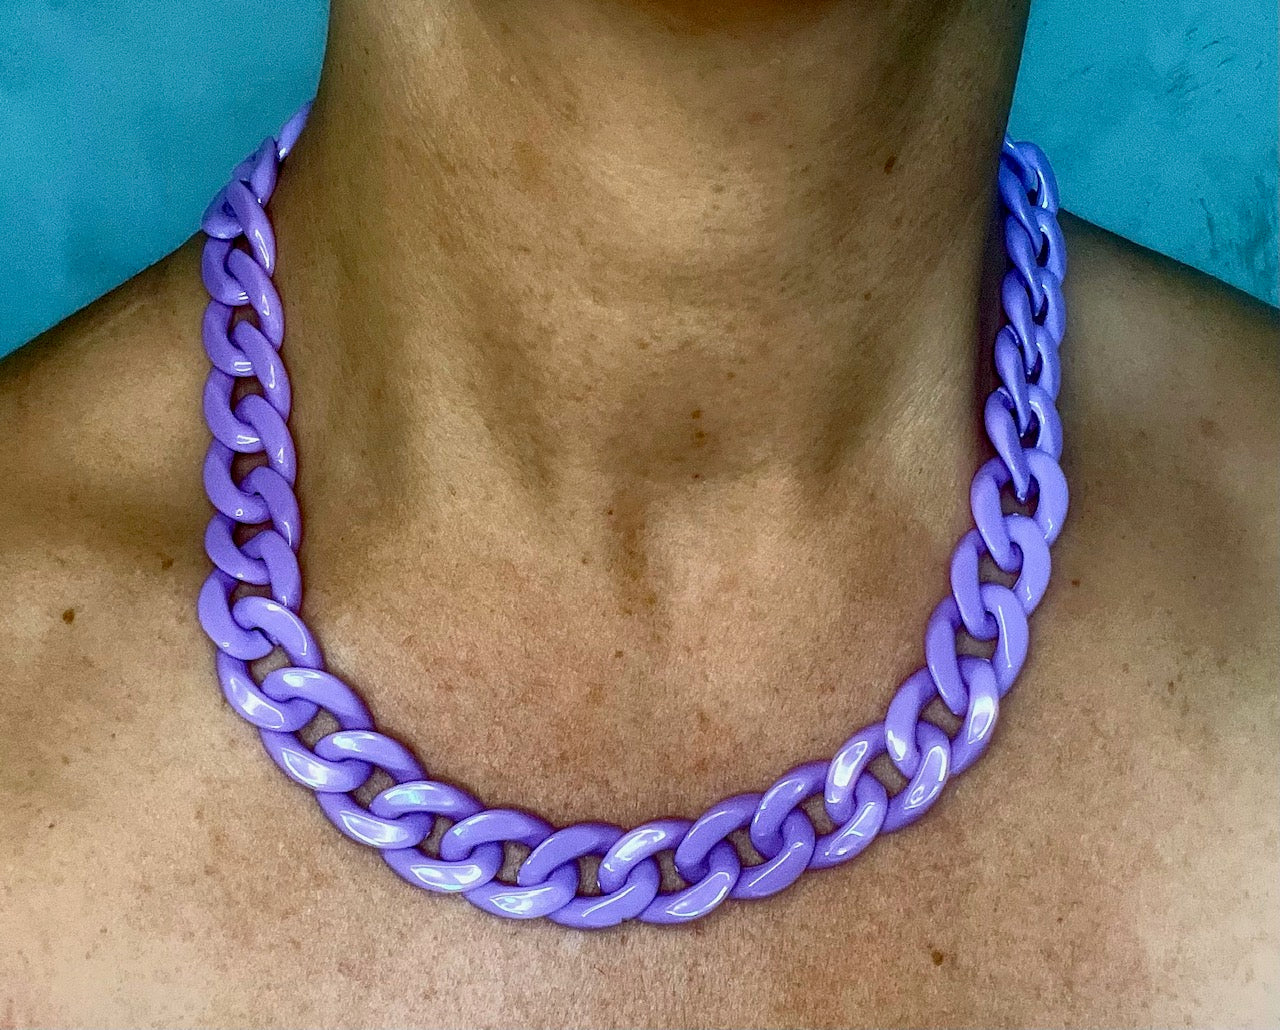 CHAIN NECKLACE